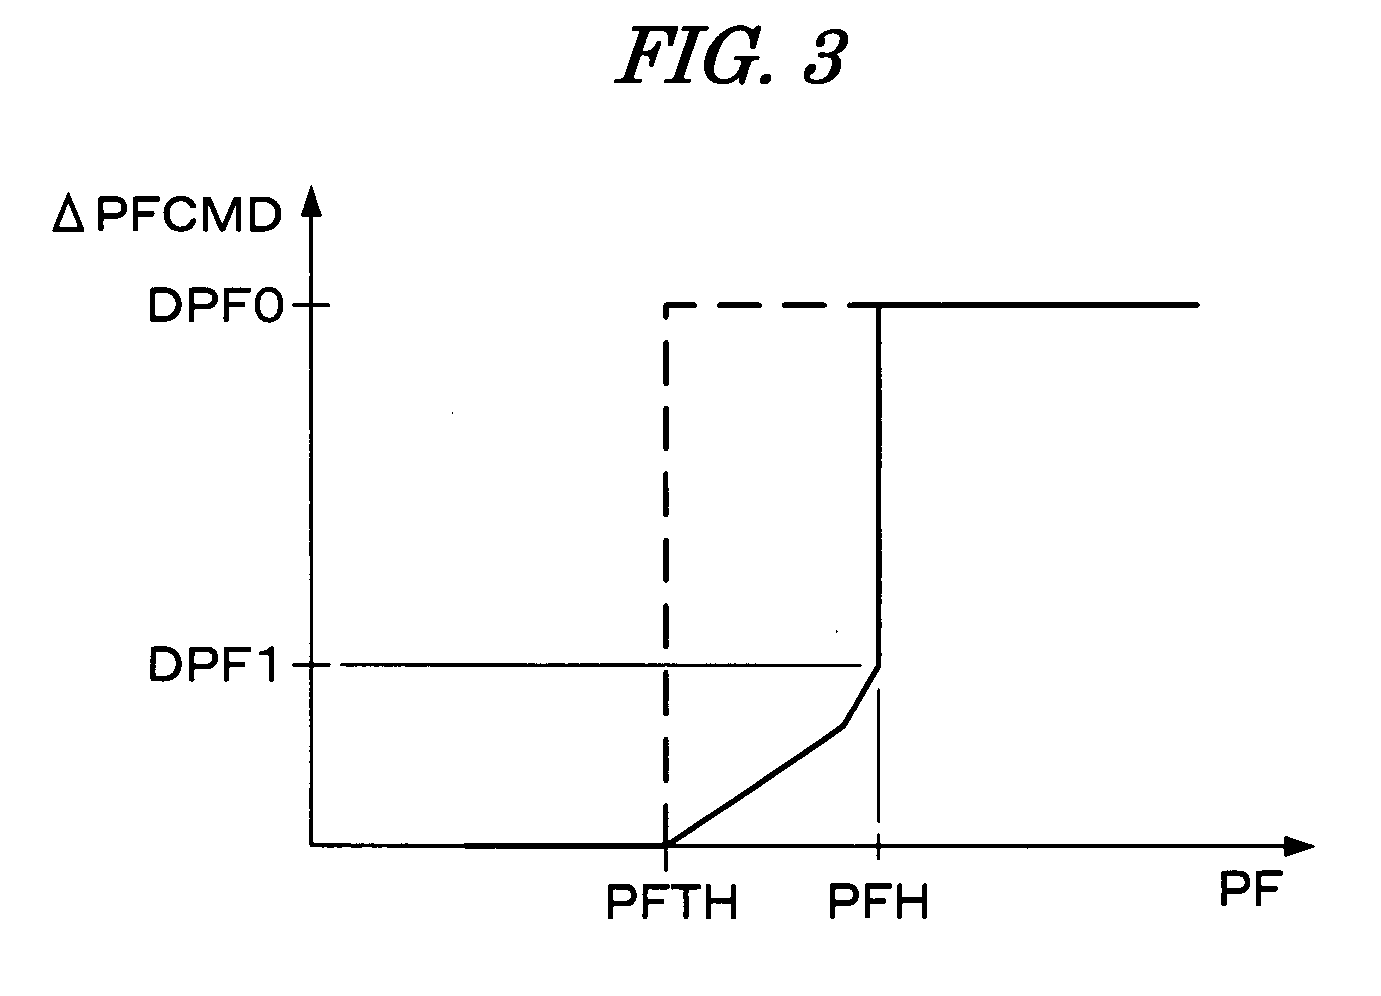 Fuel supply apparatus for internal combustion engine